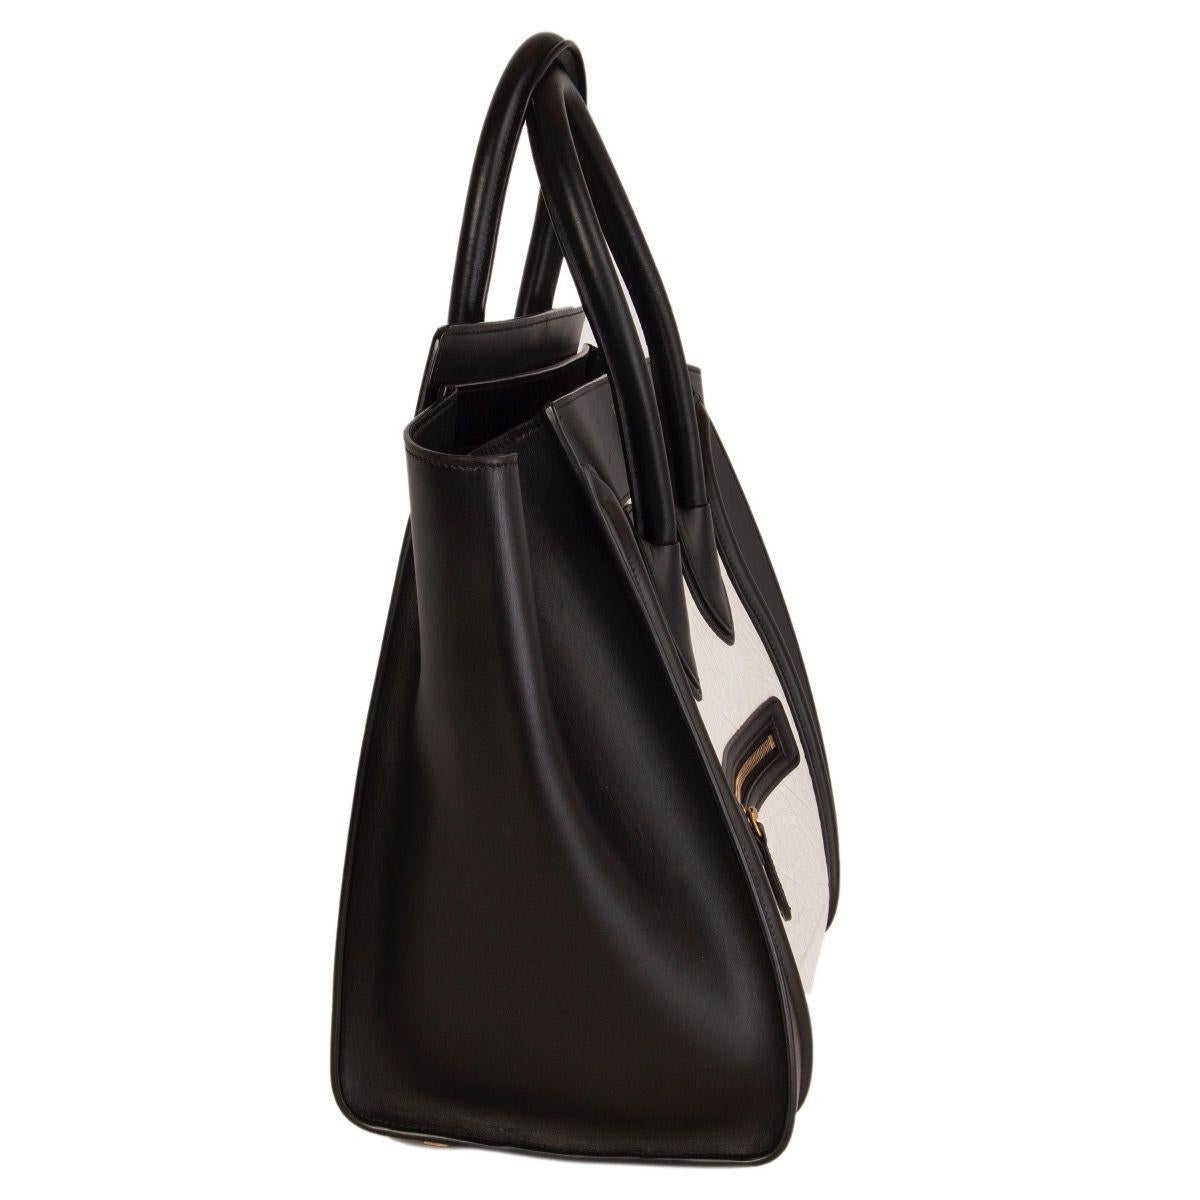 Céline 'Mini Luggage' tote in black and white large grained calfskin featuring outer zipper pocket on the front. Lined in black calfskin with one zipper pocket against the back and two open pockets against the front. Has been carried and is in